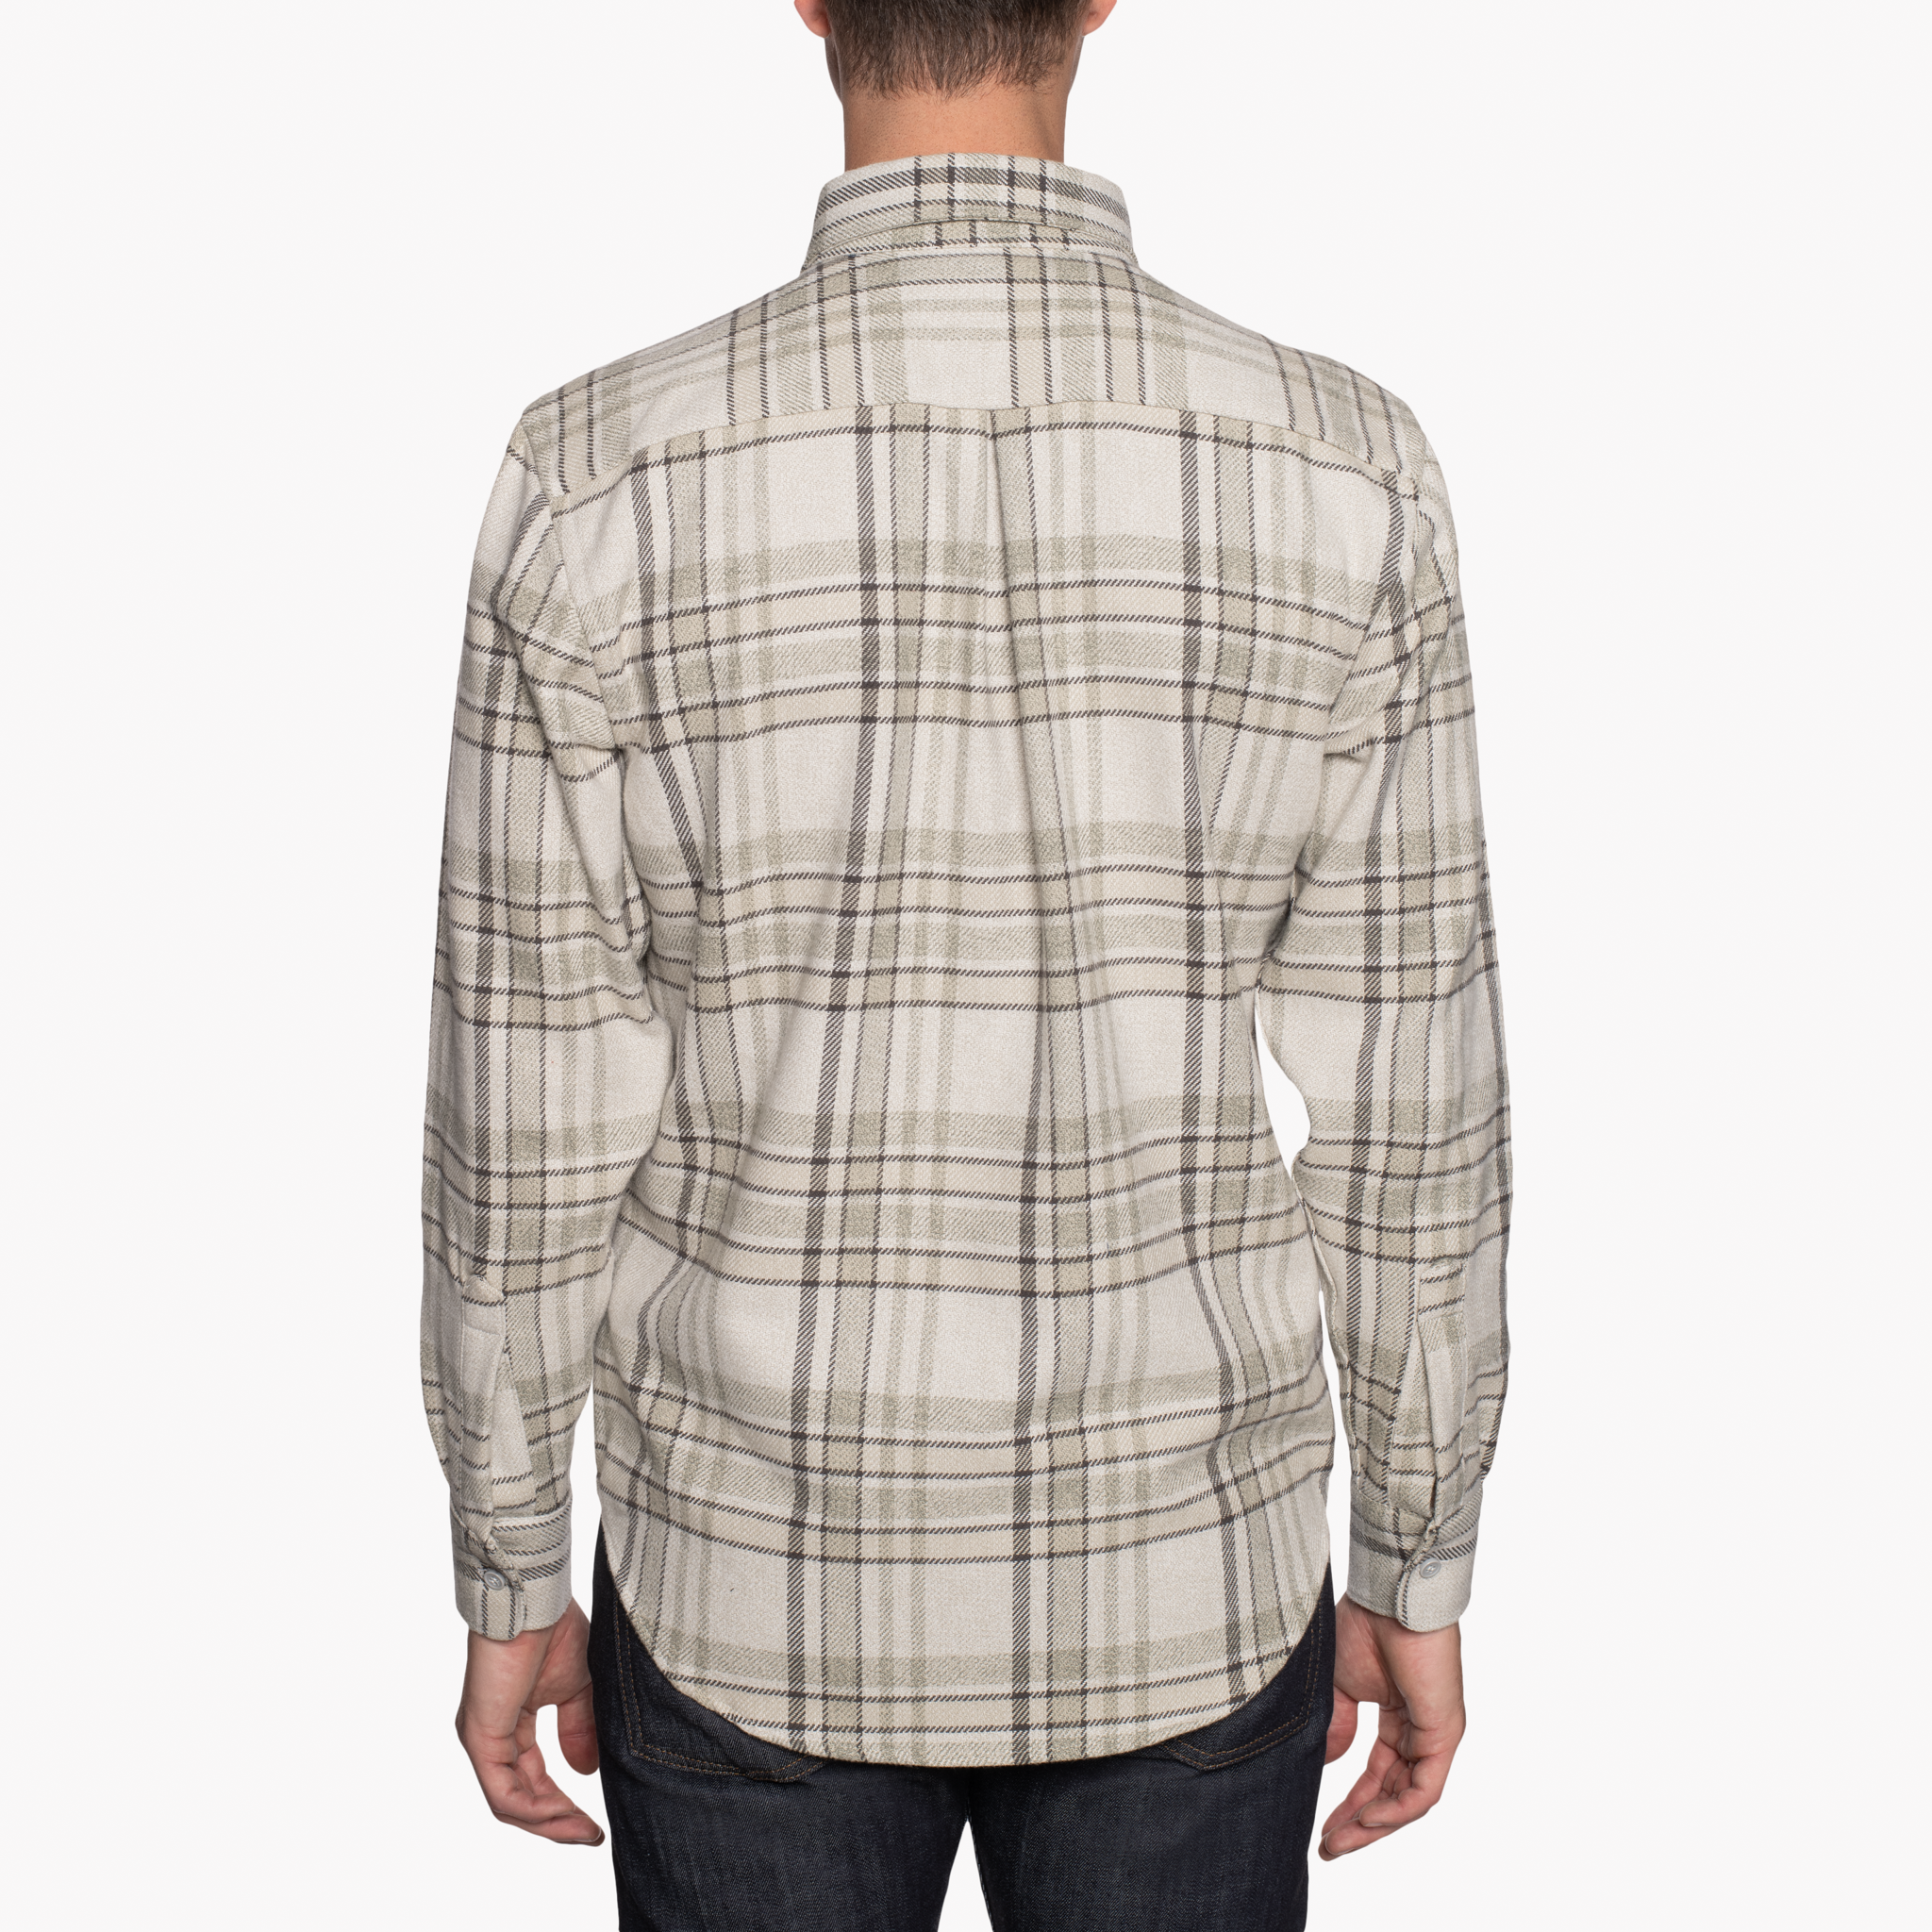  Easy Shirt - Heavy Vintage Flannel - Pale Grey - back 